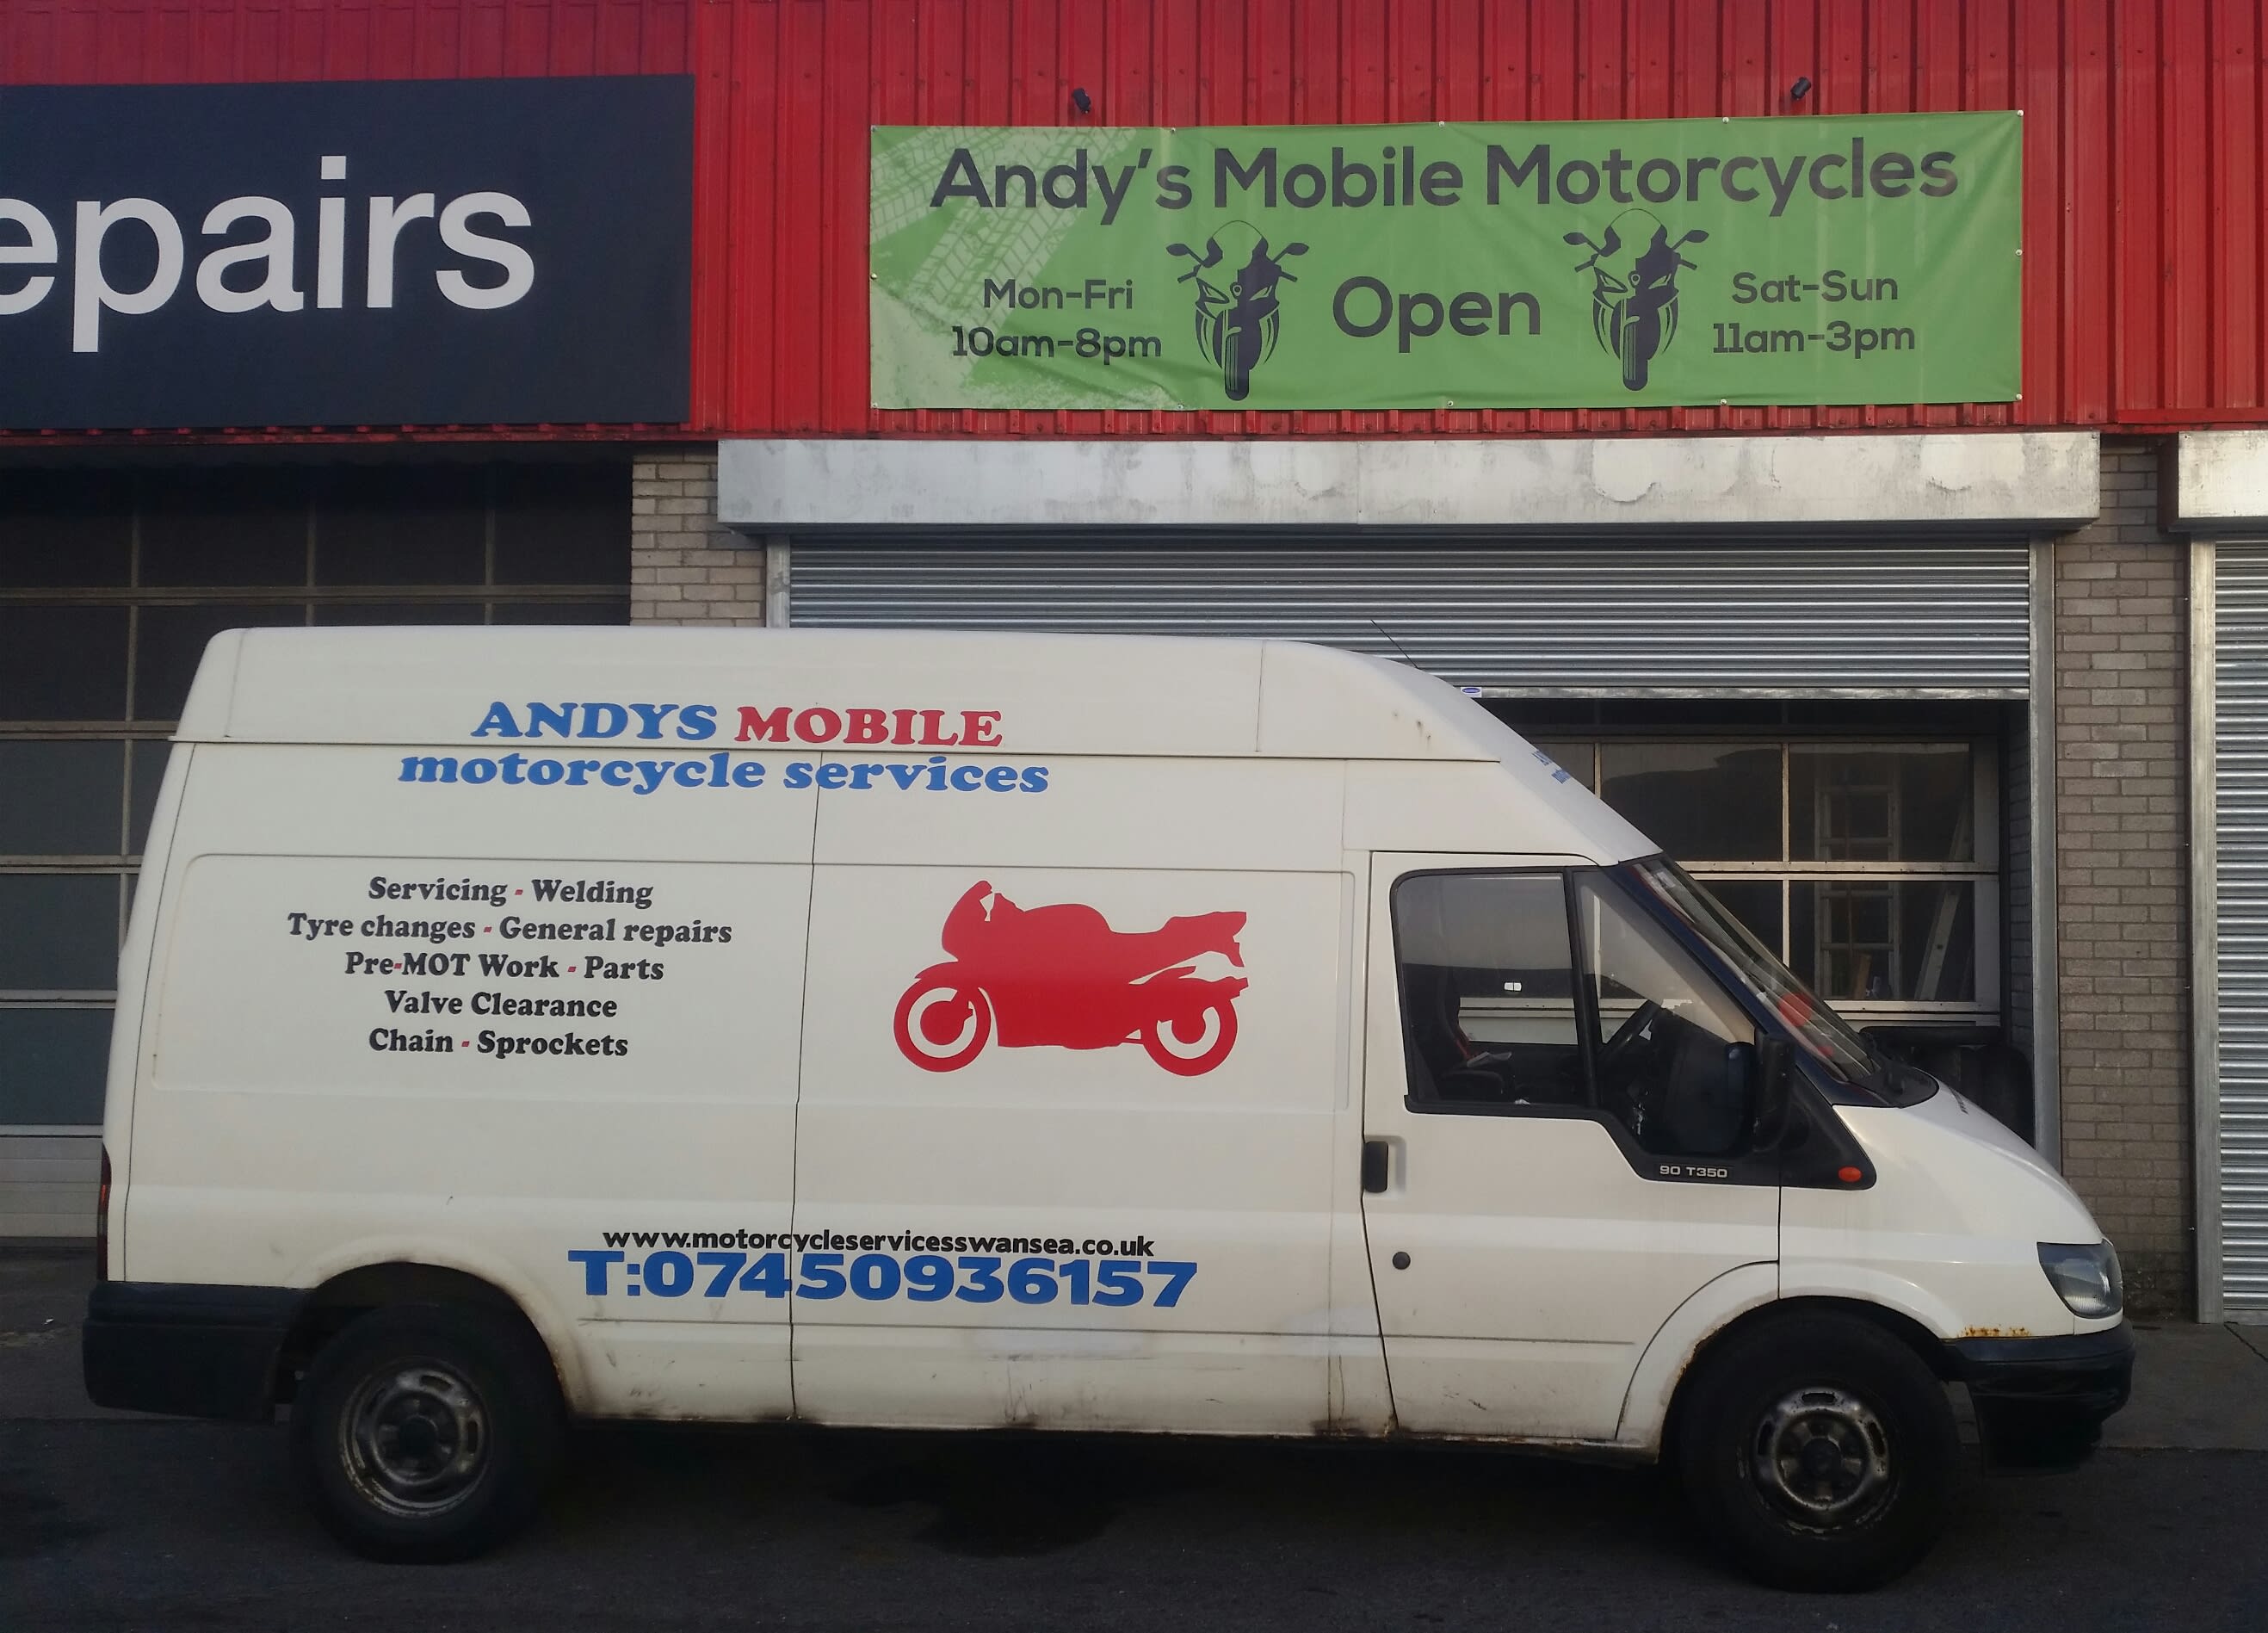 Andys Mobile Motorcycles